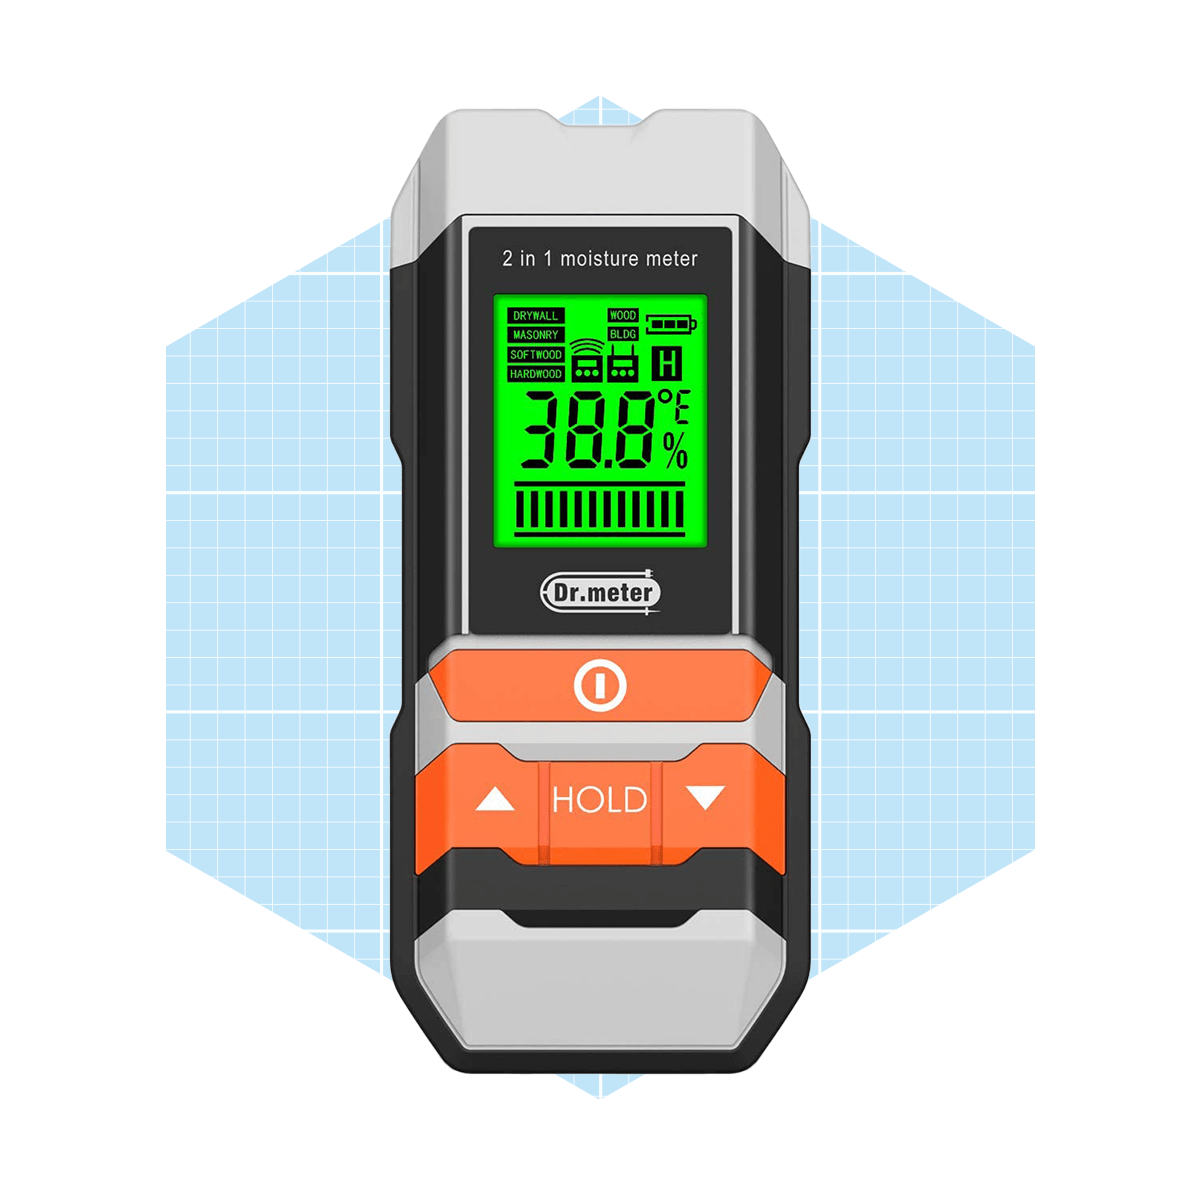 The Best Wood Moisture Meters of 2024 (Review)